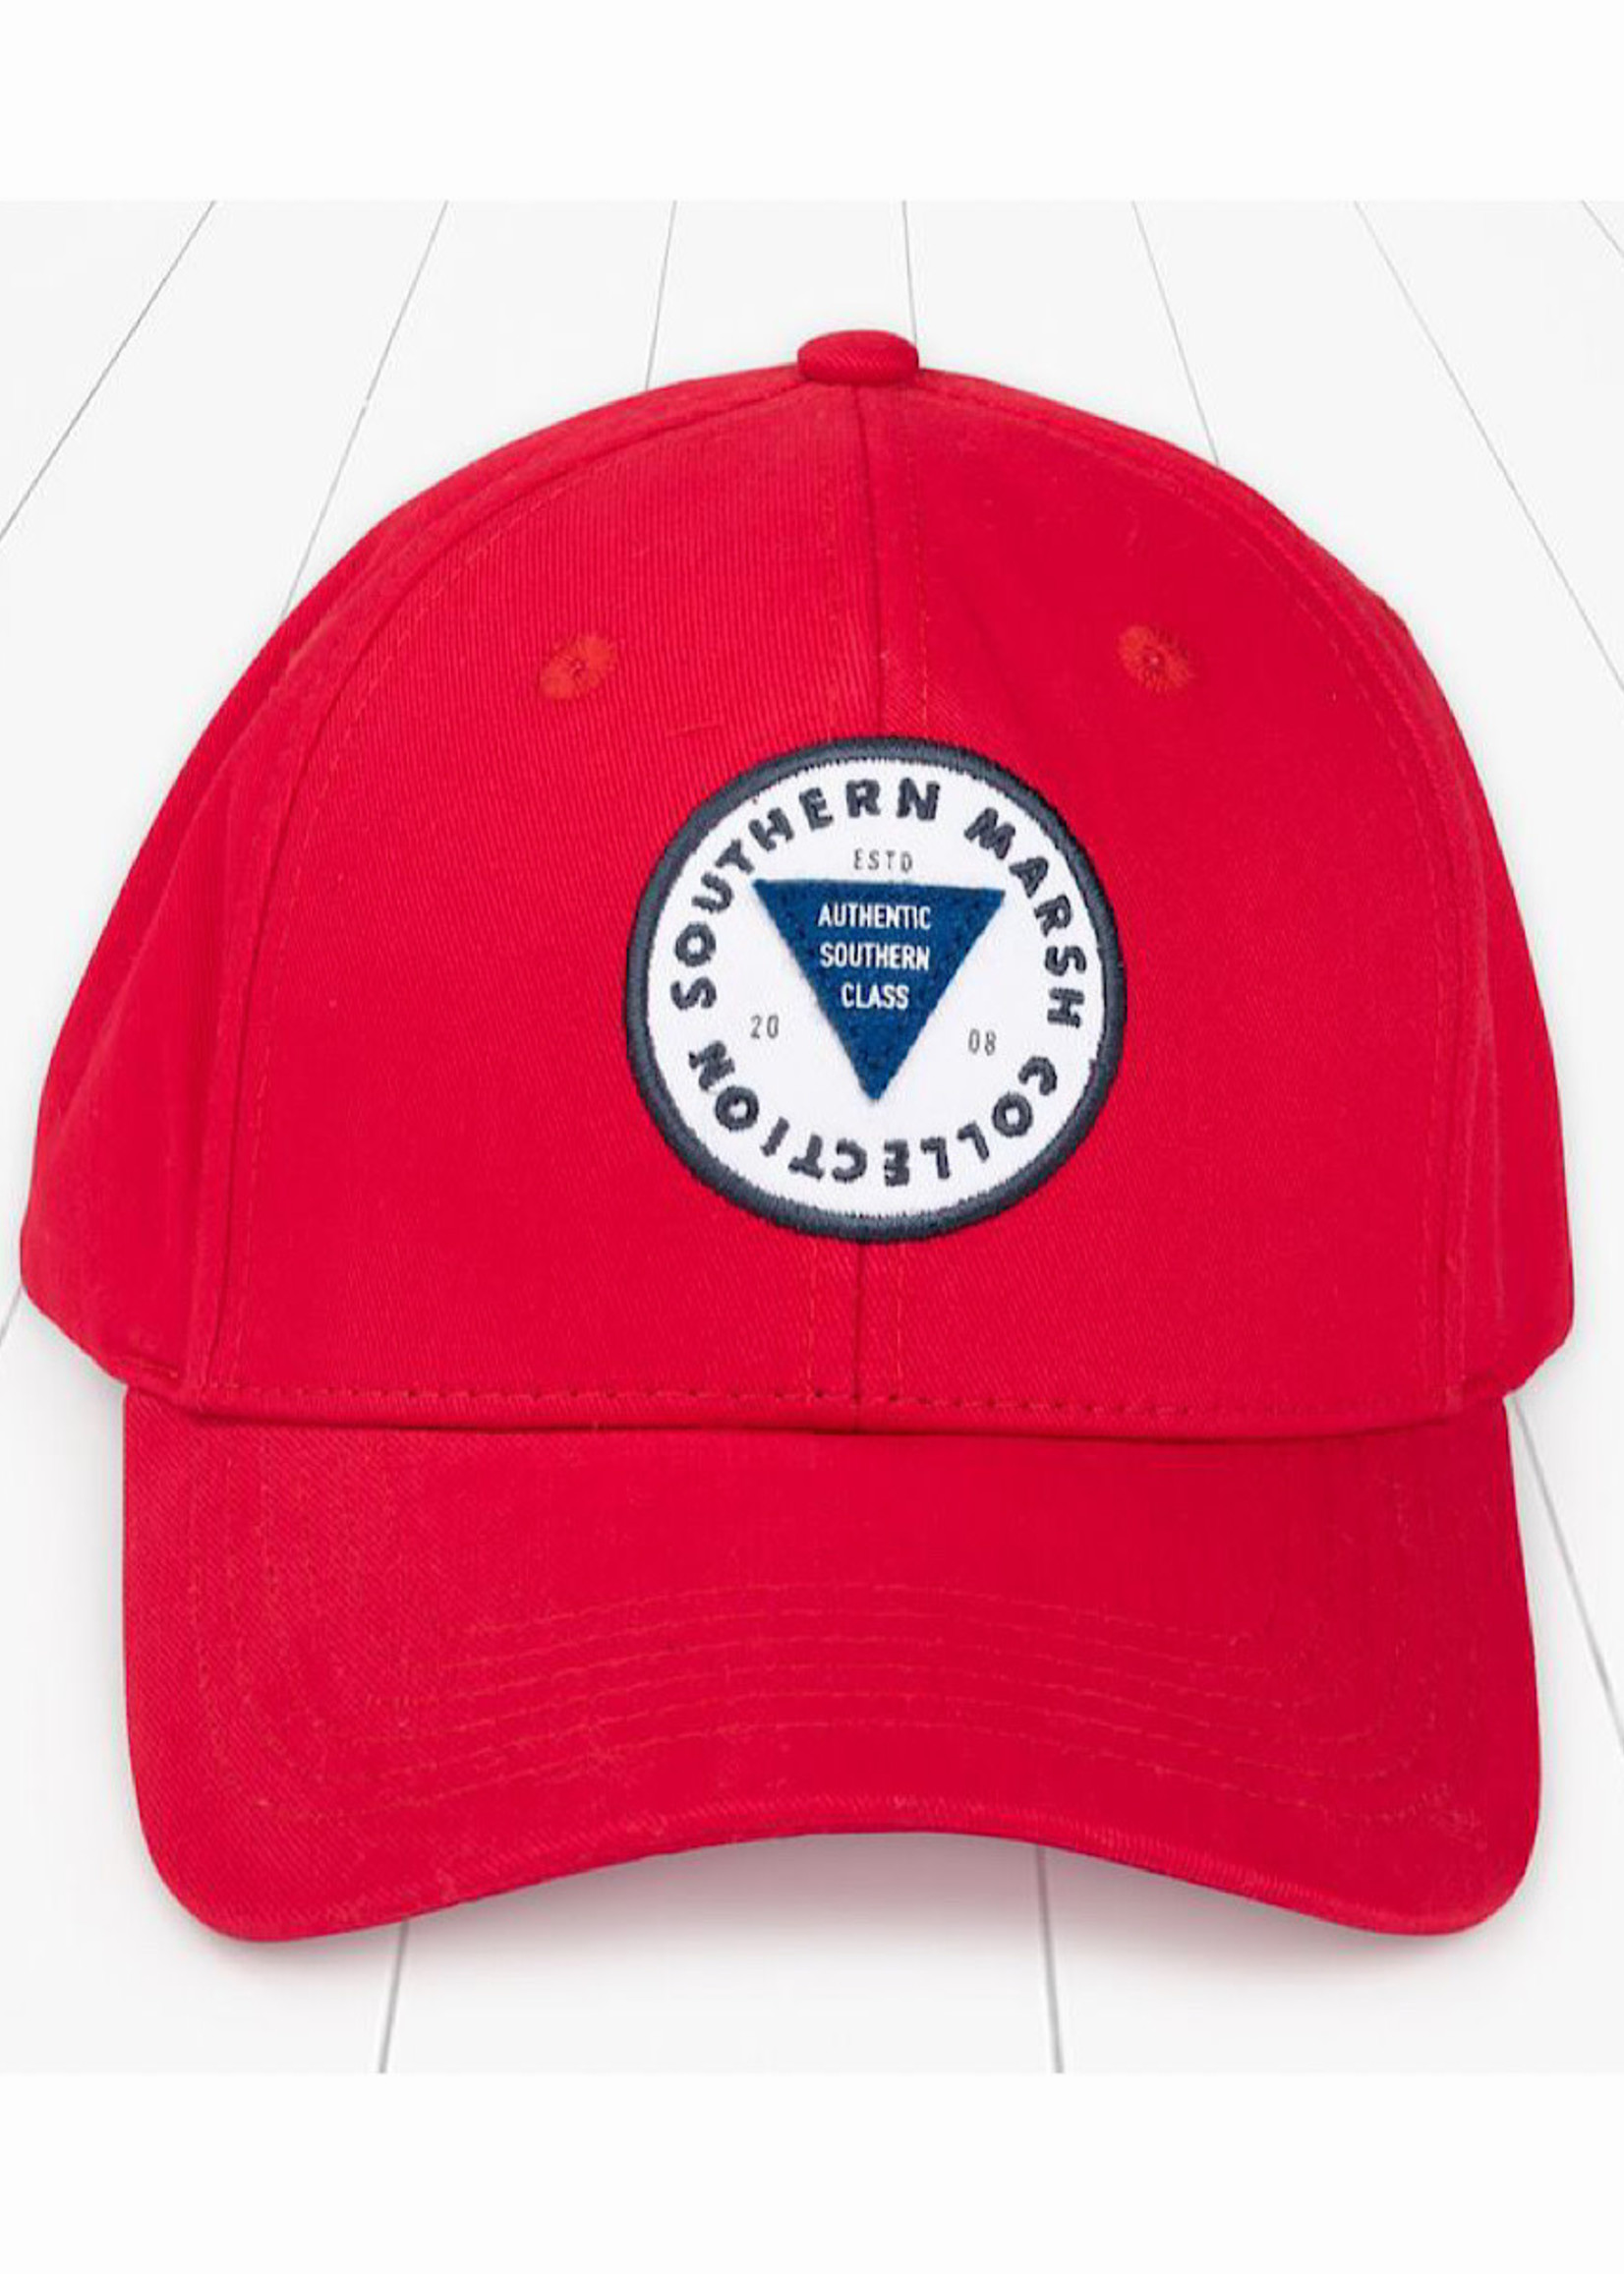 Southern Marsh Southern Marsh Boulder Patch Hat Red